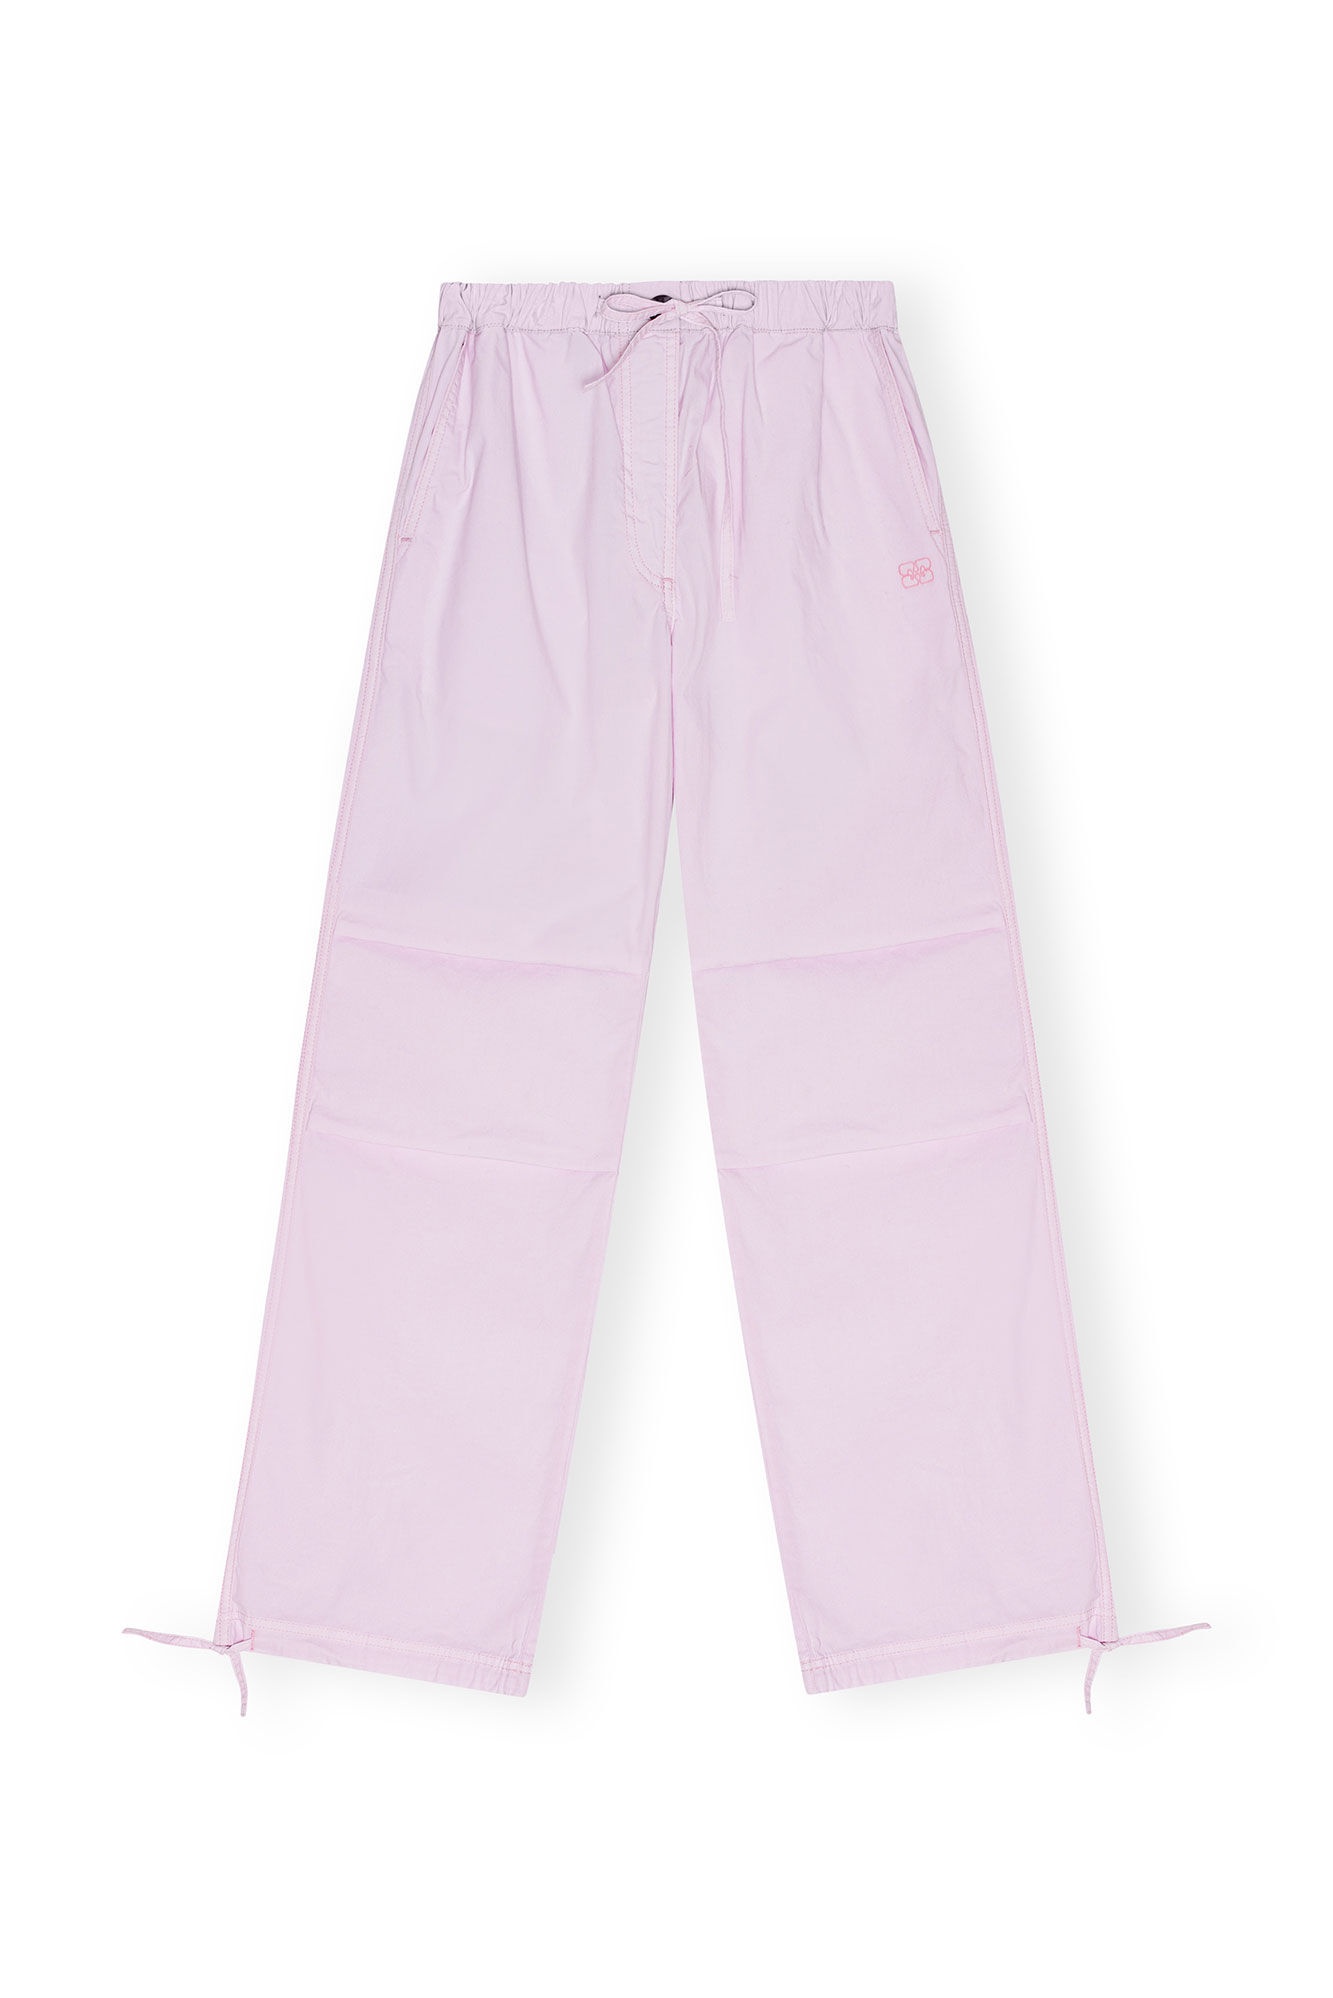 LIGHT LILAC WASHED COTTON CANVAS DRAW STRING TROUSERS - 1